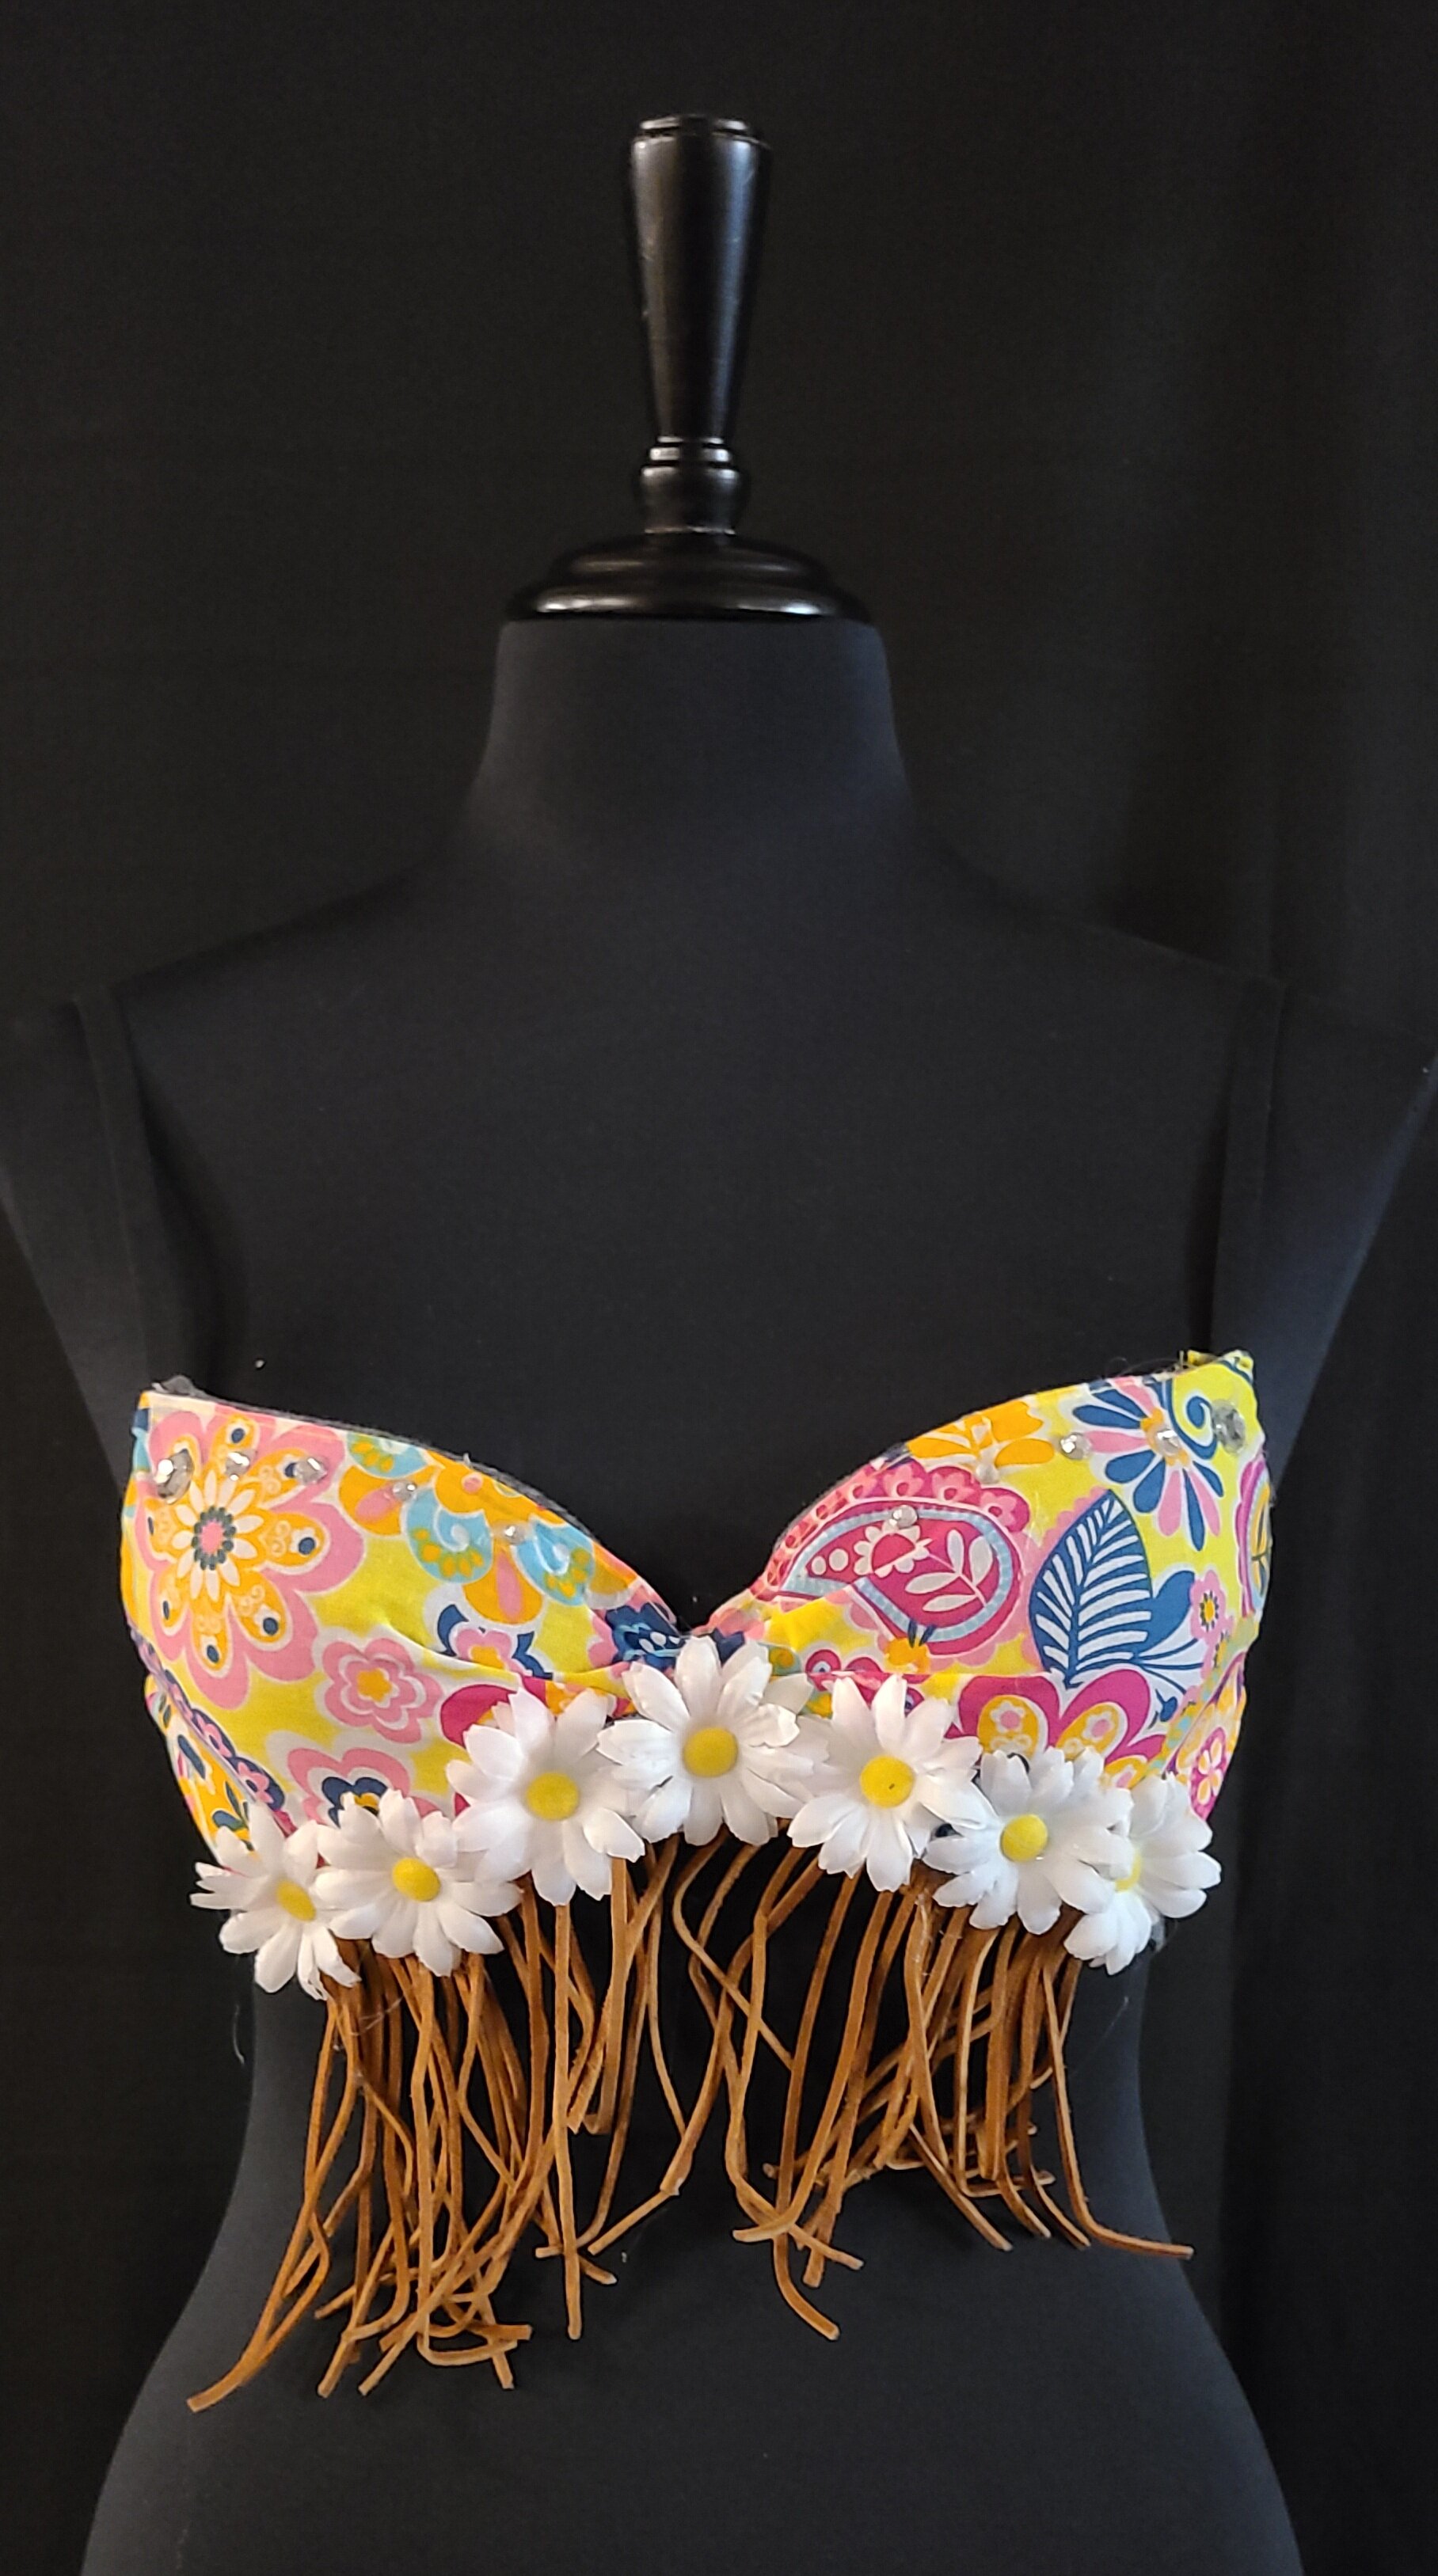 2021 Bra Art Gallery / People's Choice Award Voting — Bras for the Cause